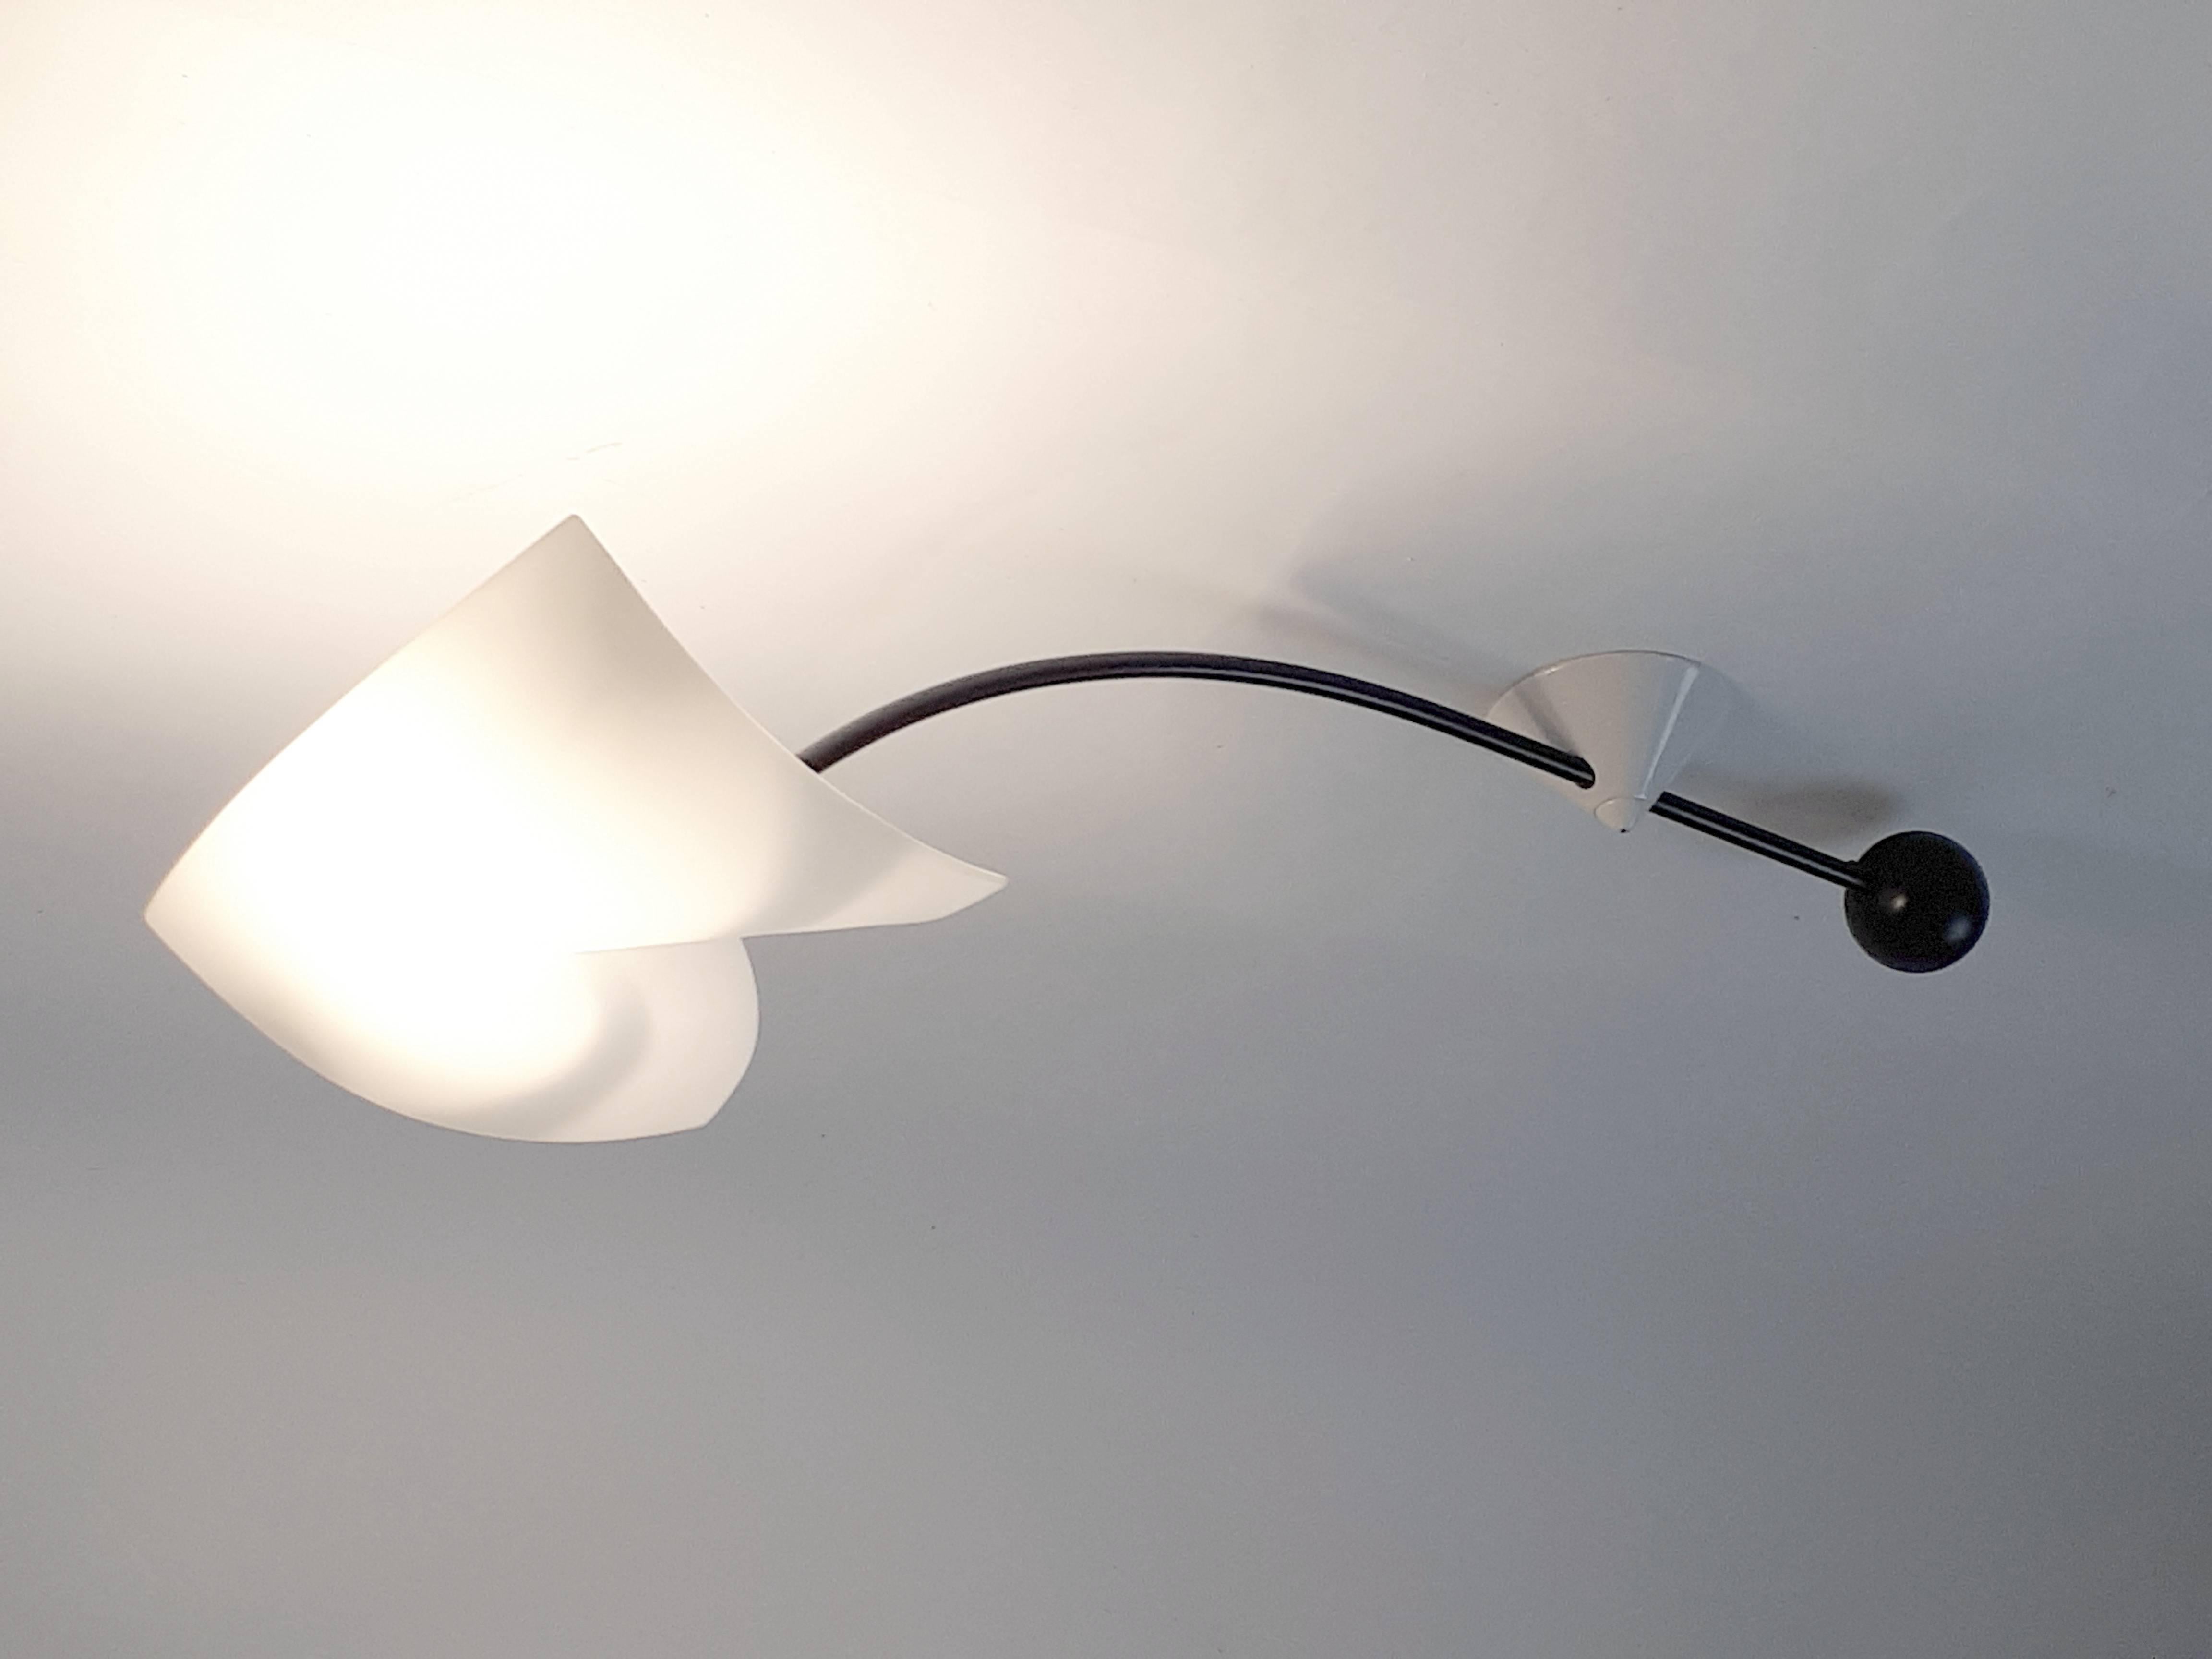 Rare lighting art piece from the Foscarini Ricerca serie.

The sculptural glass from Murano is multi layered to obtain the opale white.

Solid , well made with prime quality material. 

Use a regular R7 base dimmable T3 halogen bulb 120V rated at